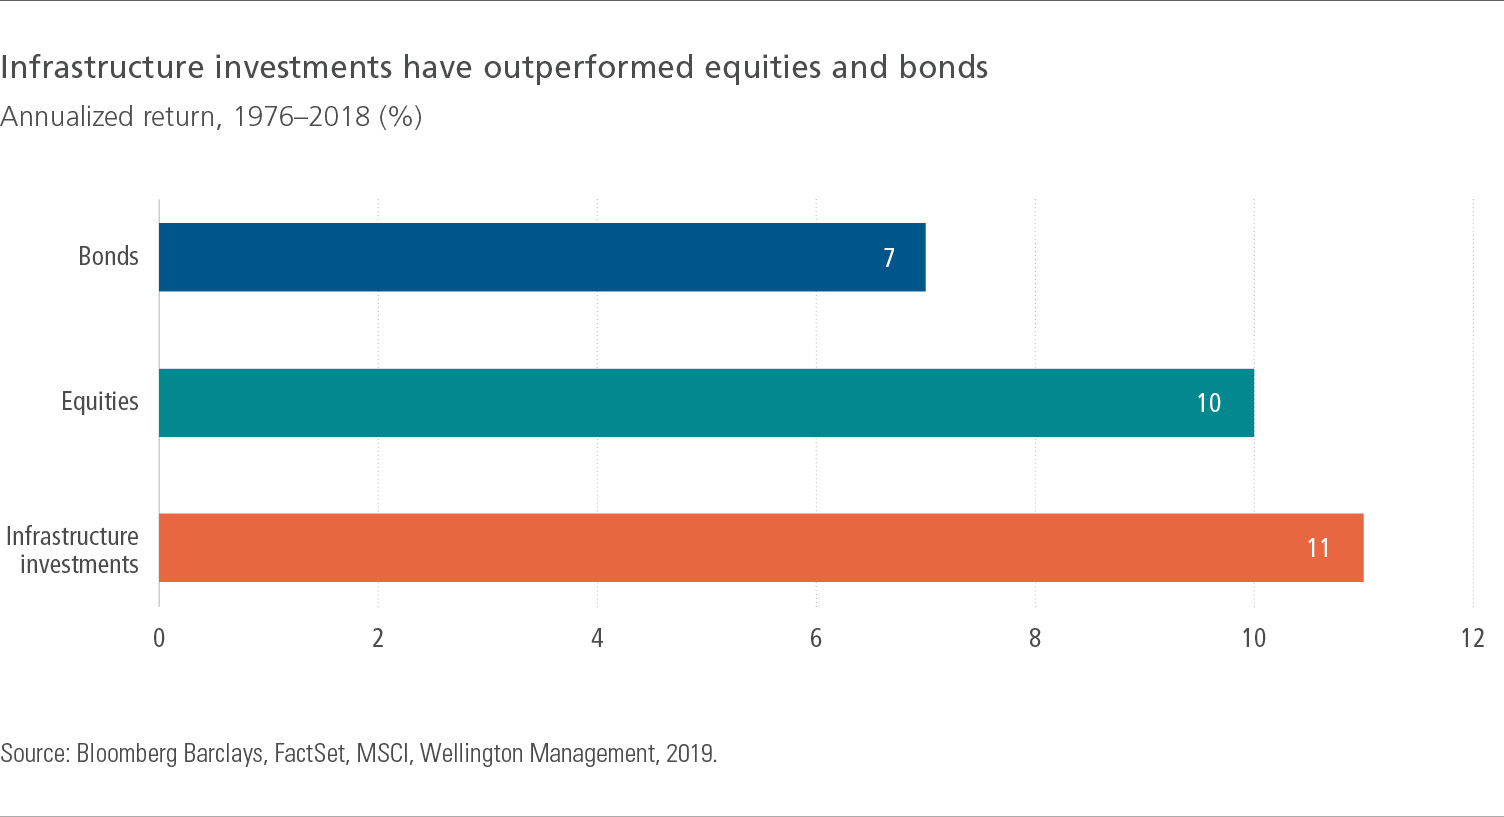 Infrastructure investments have outperformed equities and bonds